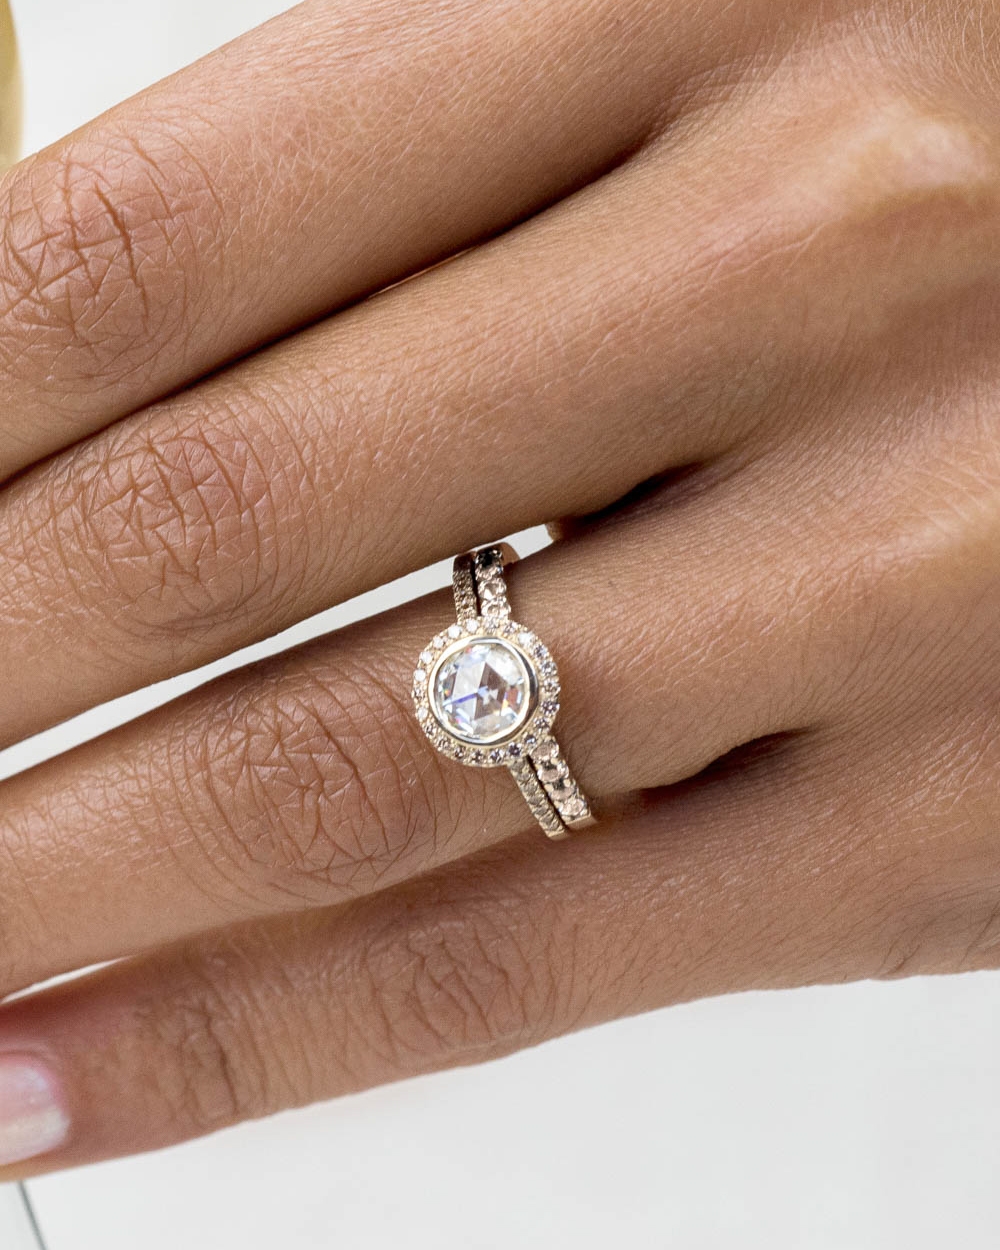 2018_on_fig_champagne_suites_soma_rose_cut_diamond_with_champagne_halo_ring_stack-1023_crop.jpg